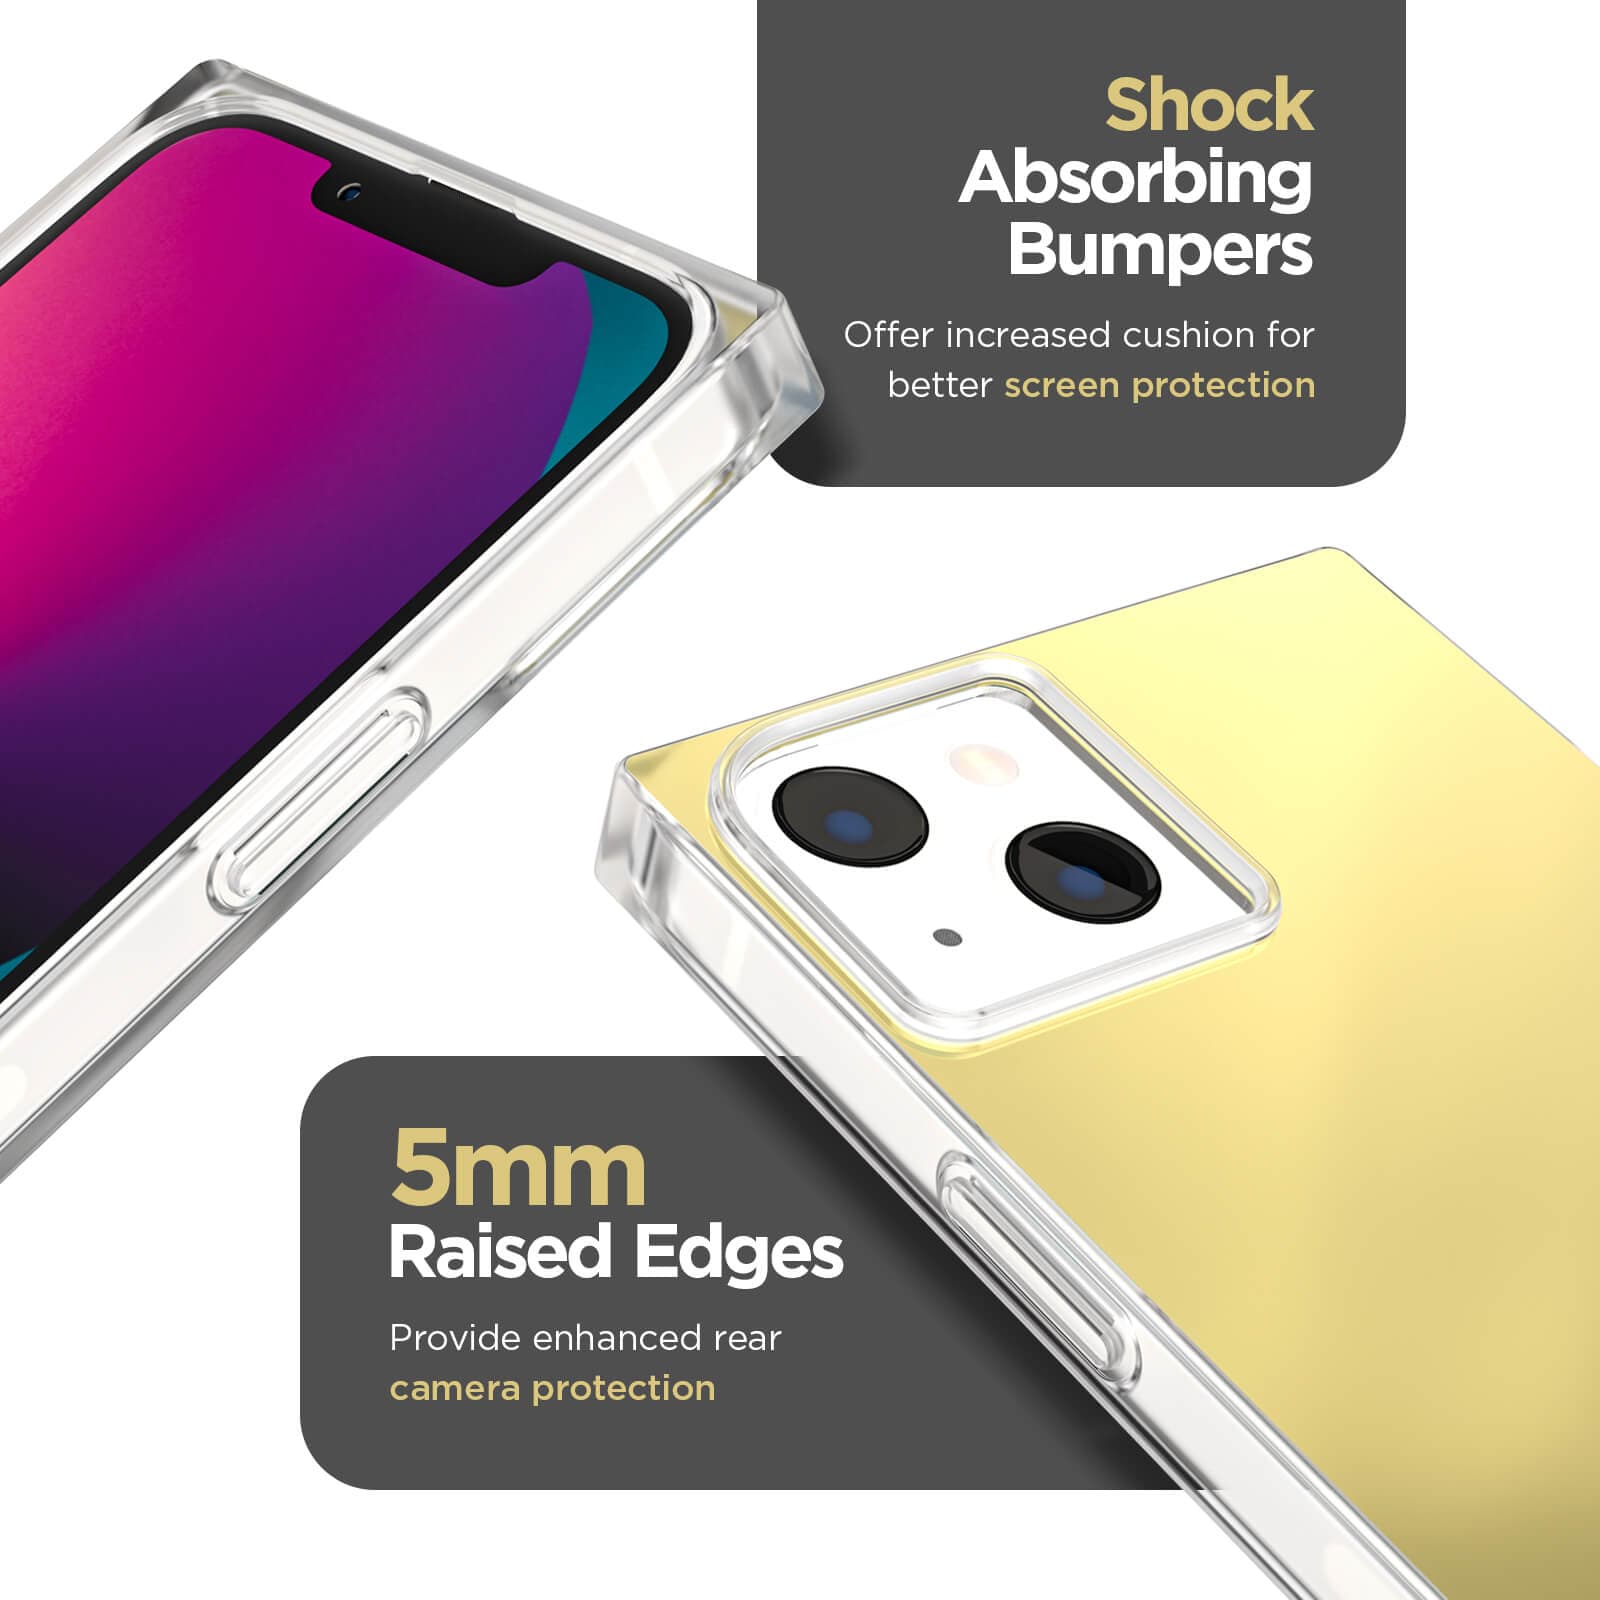 Shock absorbing bumpers offer increase cushion for better screen protection. 5mm raised edges provide enhanced rear camera protection. color::Gold